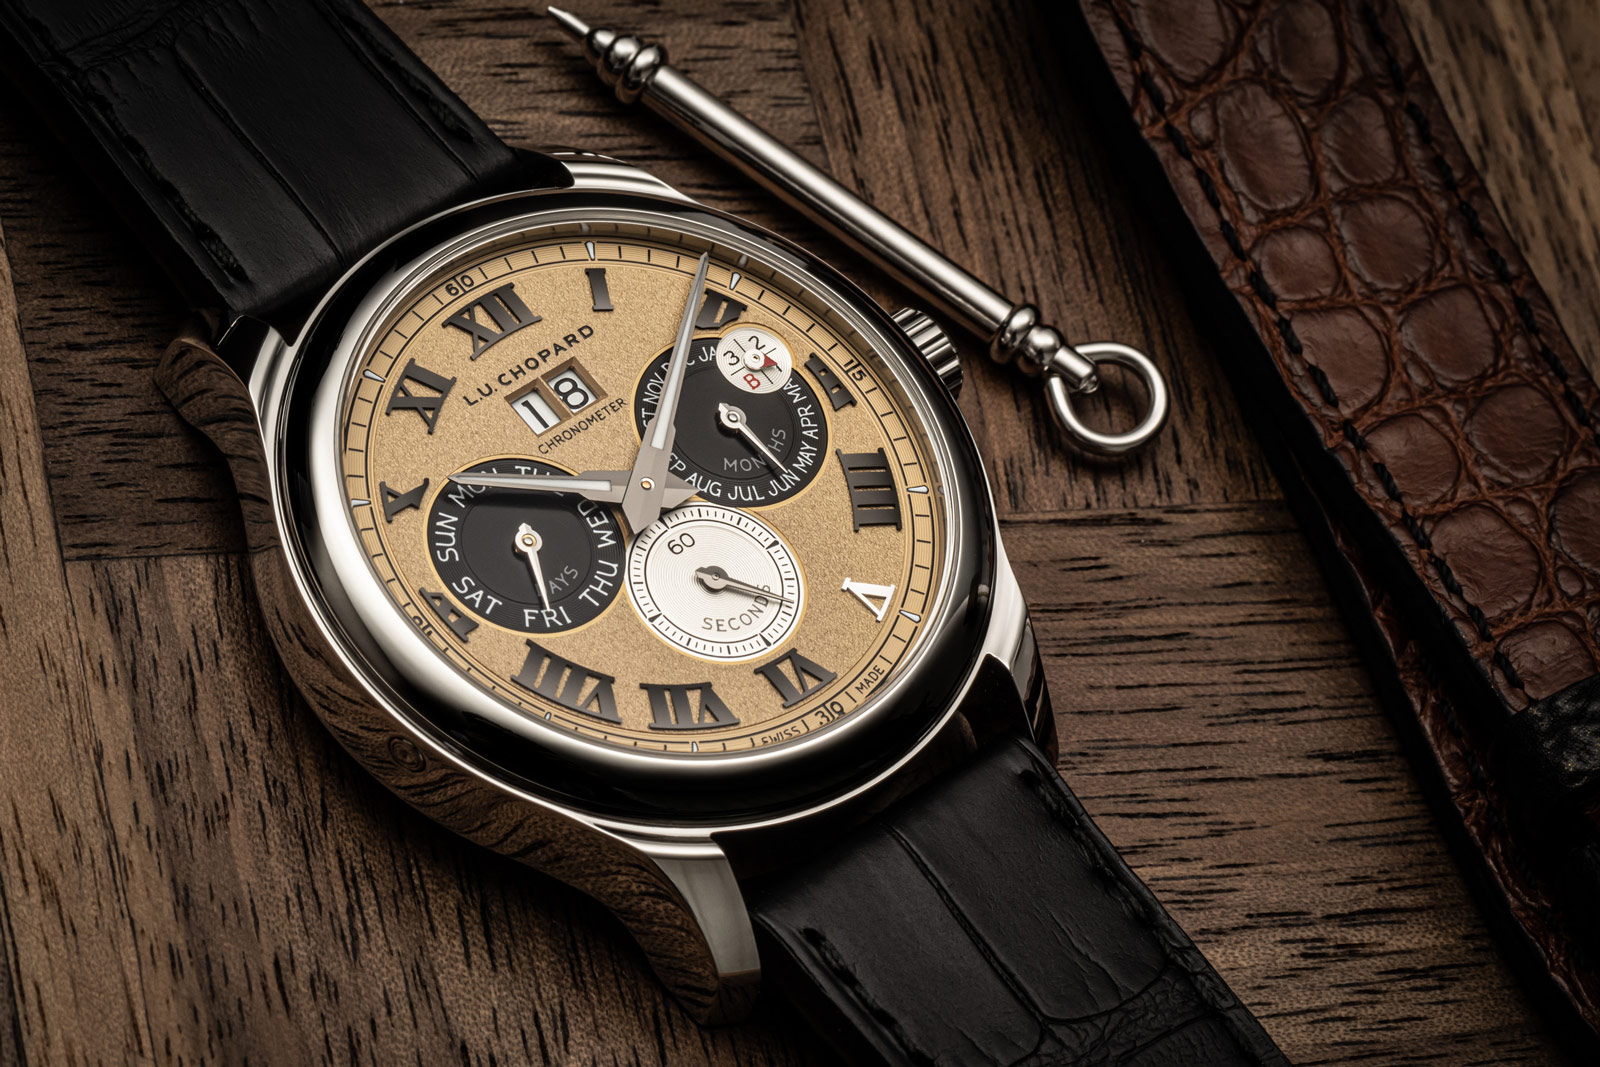 Chopard Introduces the L.U.C Perpetual Twin CronotempVs Edition